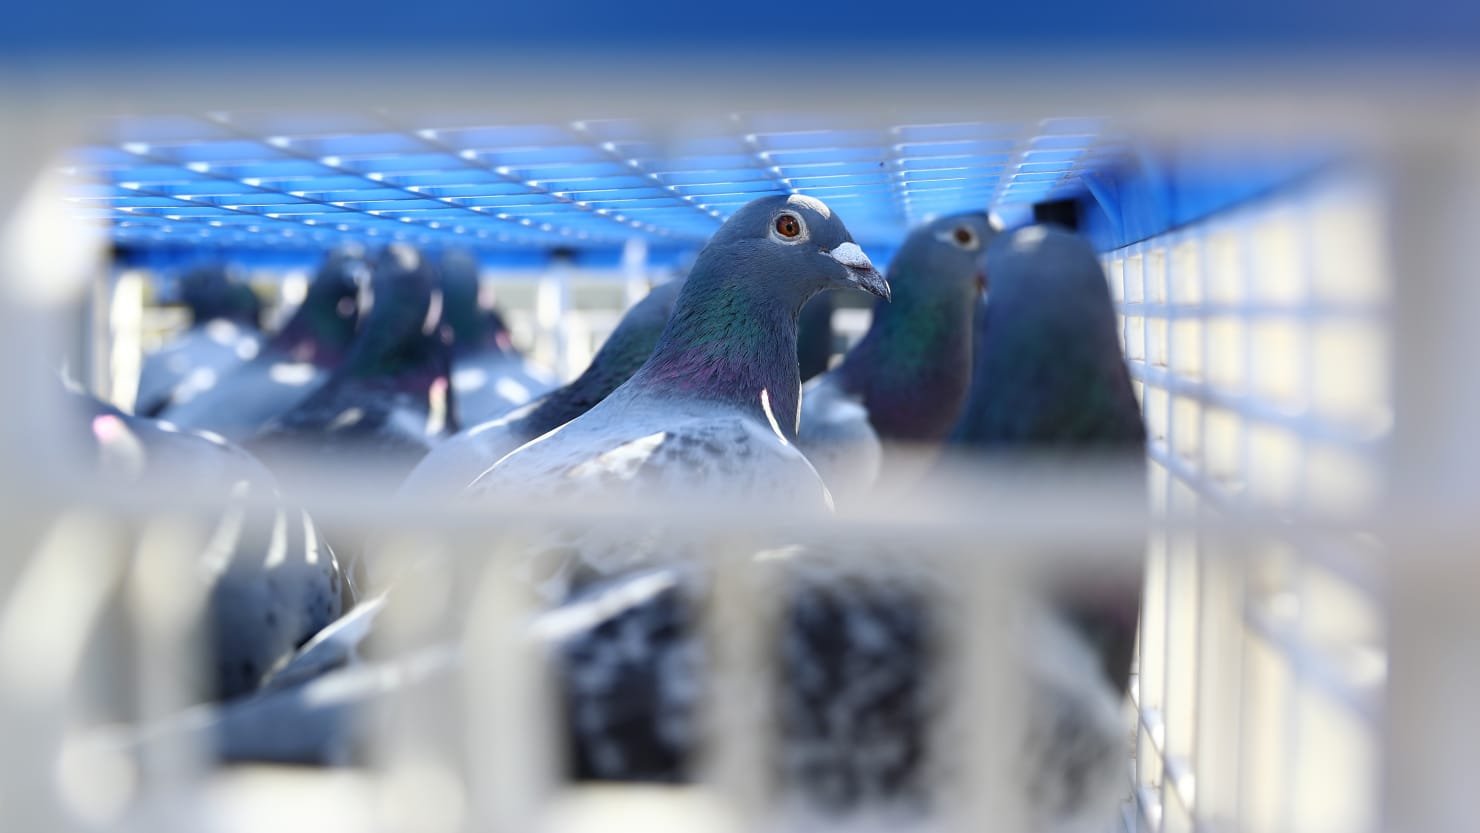 Belgian Racing Pigeon Sells for Record-Breaking $1.9 Million to Unidentified Chinese Buyer